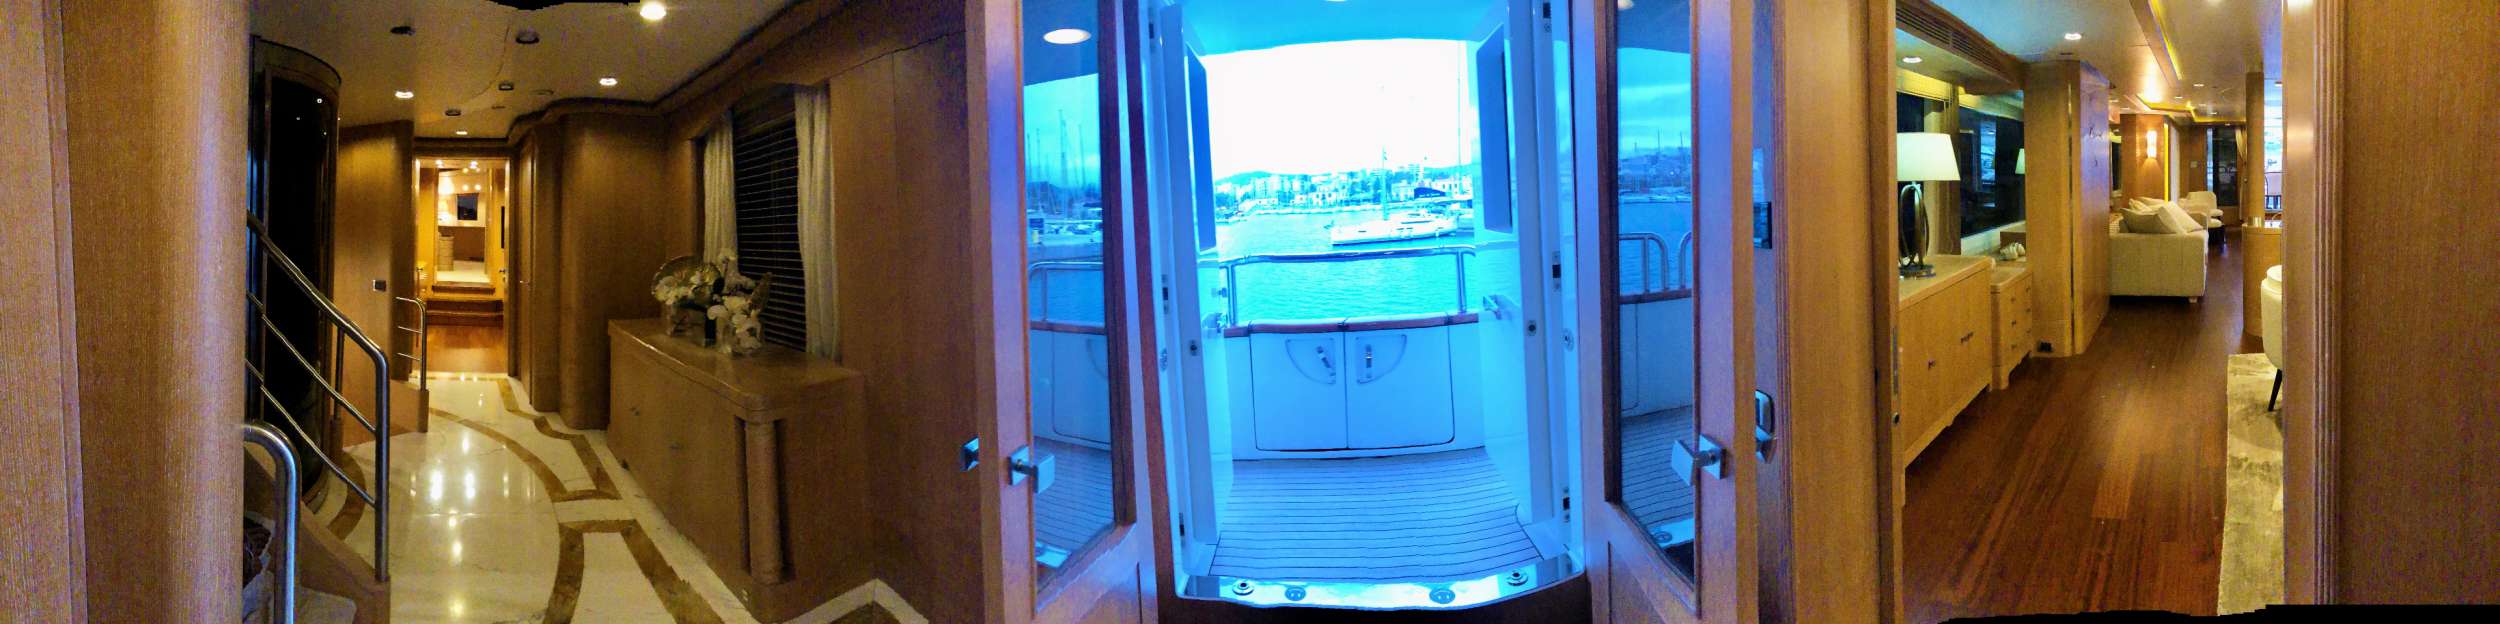 GRANDE AMORE Yacht Charter - Main Deck Corridor with Balcony and Elevator